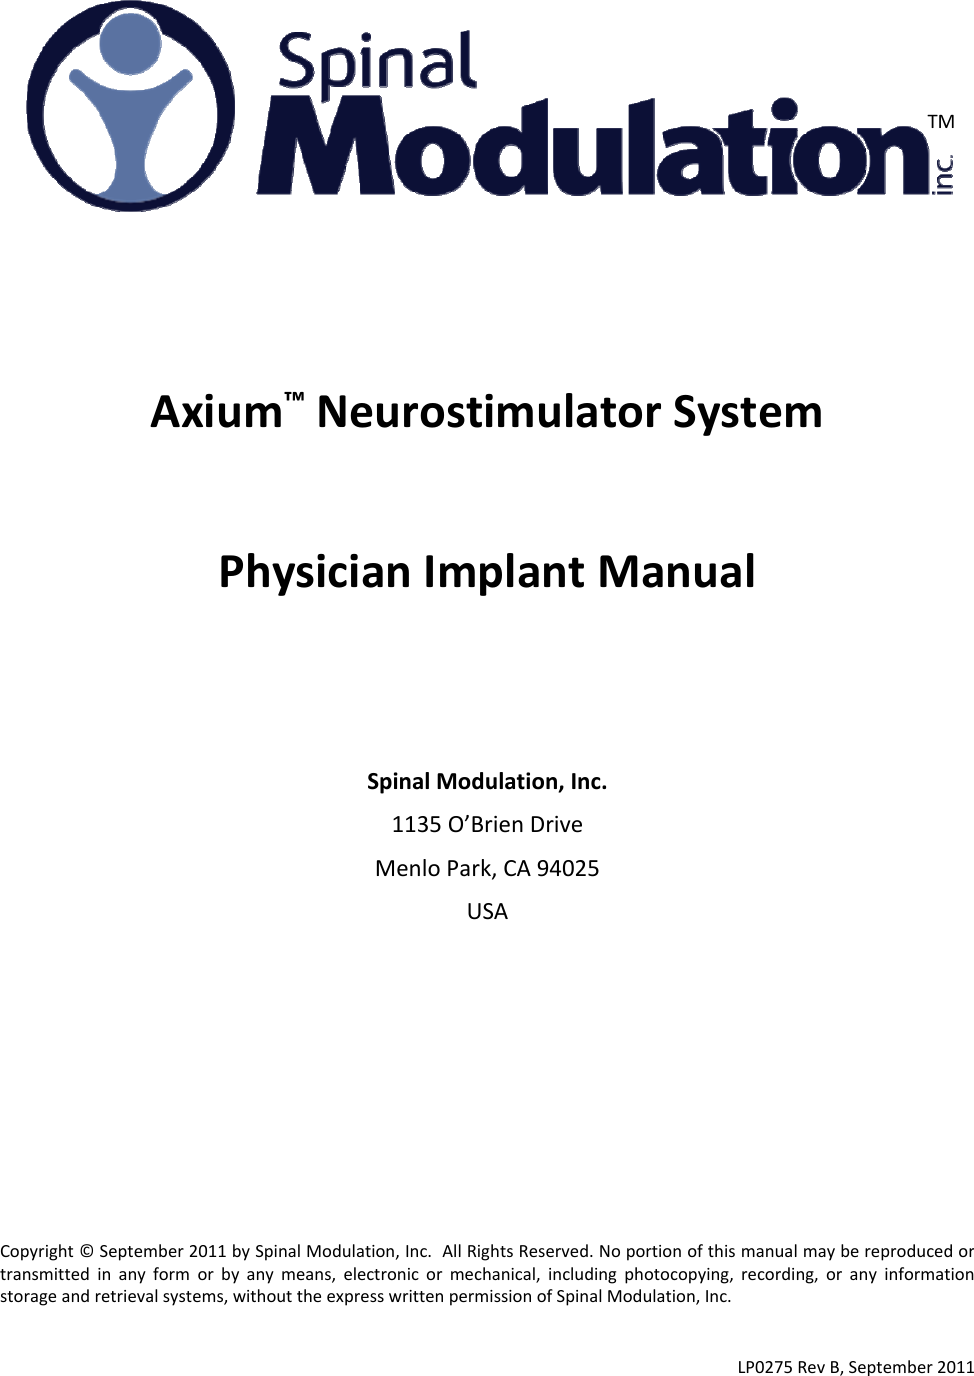 Axium™NeurostimulatorSystemPhysicianImplantManualSpinalModulation,Inc.1135O’BrienDriveMenloPark,CA94025USACopyright©September2011bySpinalModulation,Inc.AllRightsReserved.Noportionofthismanualmaybereproducedortransmittedinanyformorbyanymeans,electronicormechanical,includingphotocopying,recording,oranyinformationstorageandretrievalsystems,withouttheexpresswrittenpermissionofSpinalModulation,Inc.LP0275RevB,September2011TM